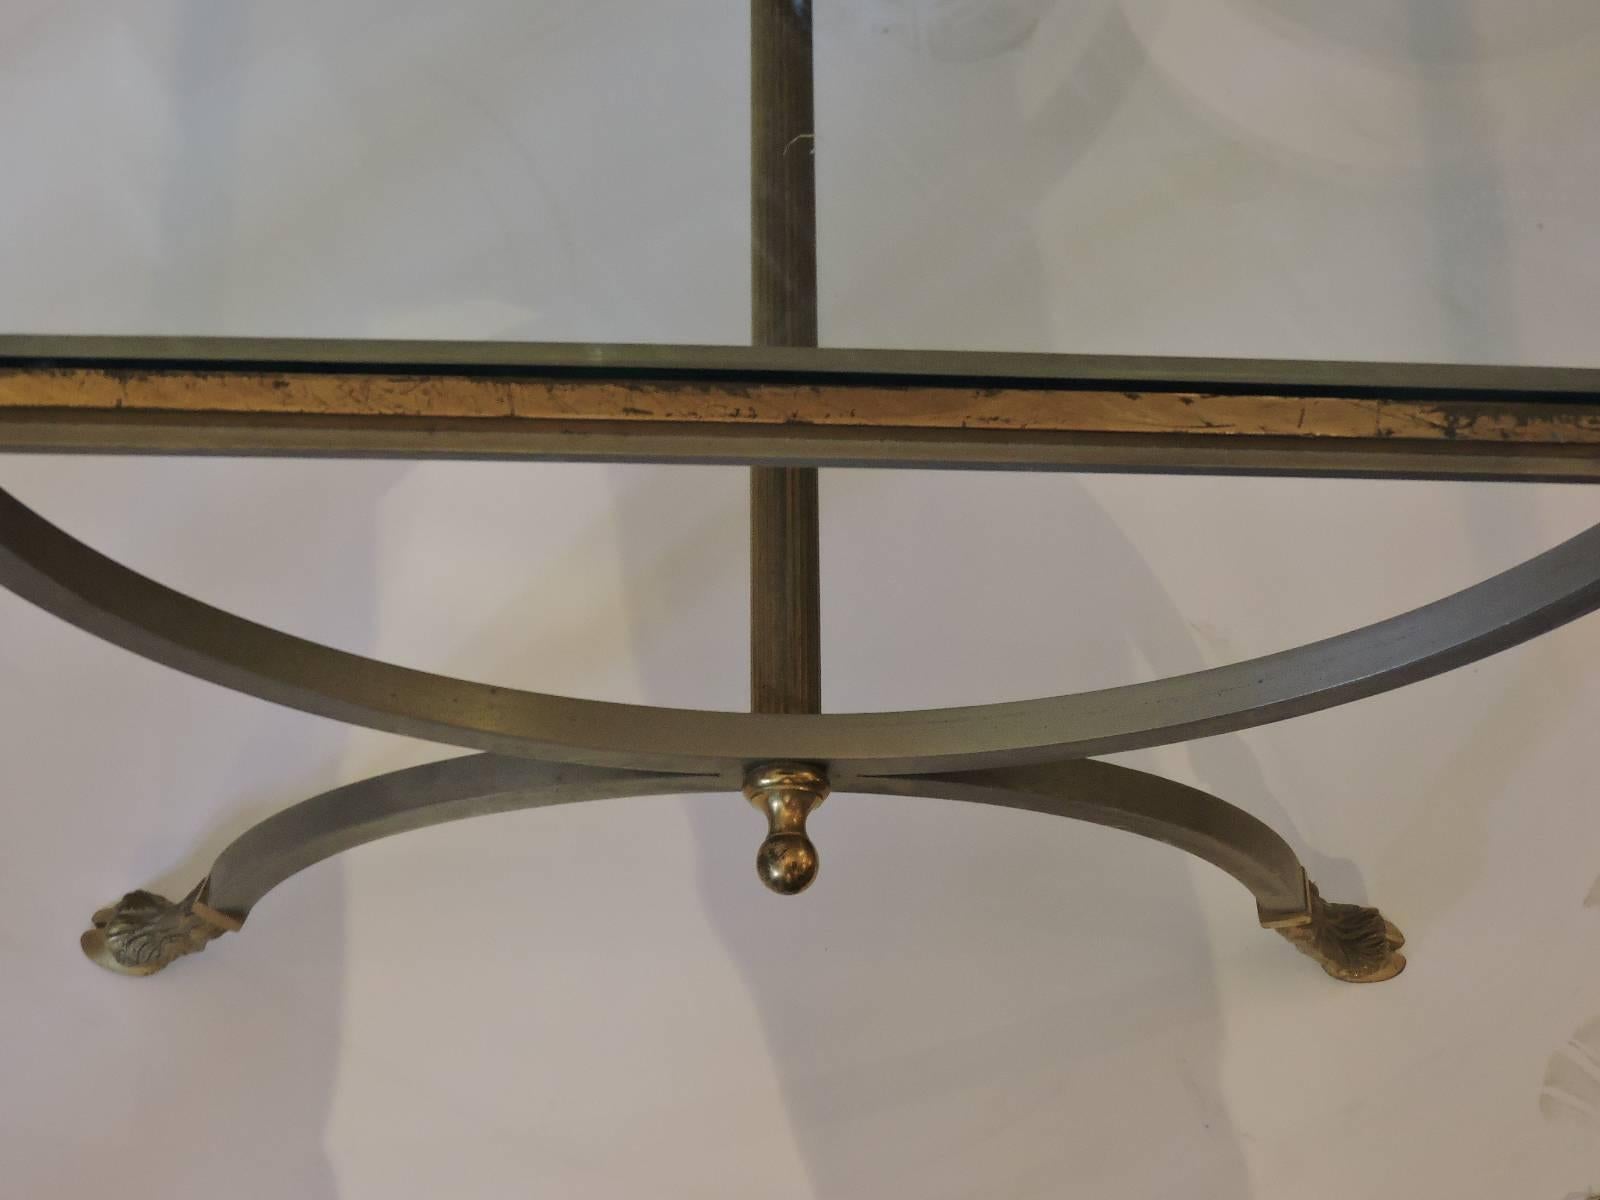 A pair of exceptional quality steel and gilt brass decorated side tables with finely detailed hoof feet and beautifully aged old surface and patina color to metal ware, circa 1960-1970 in the style of Maison Jansen.